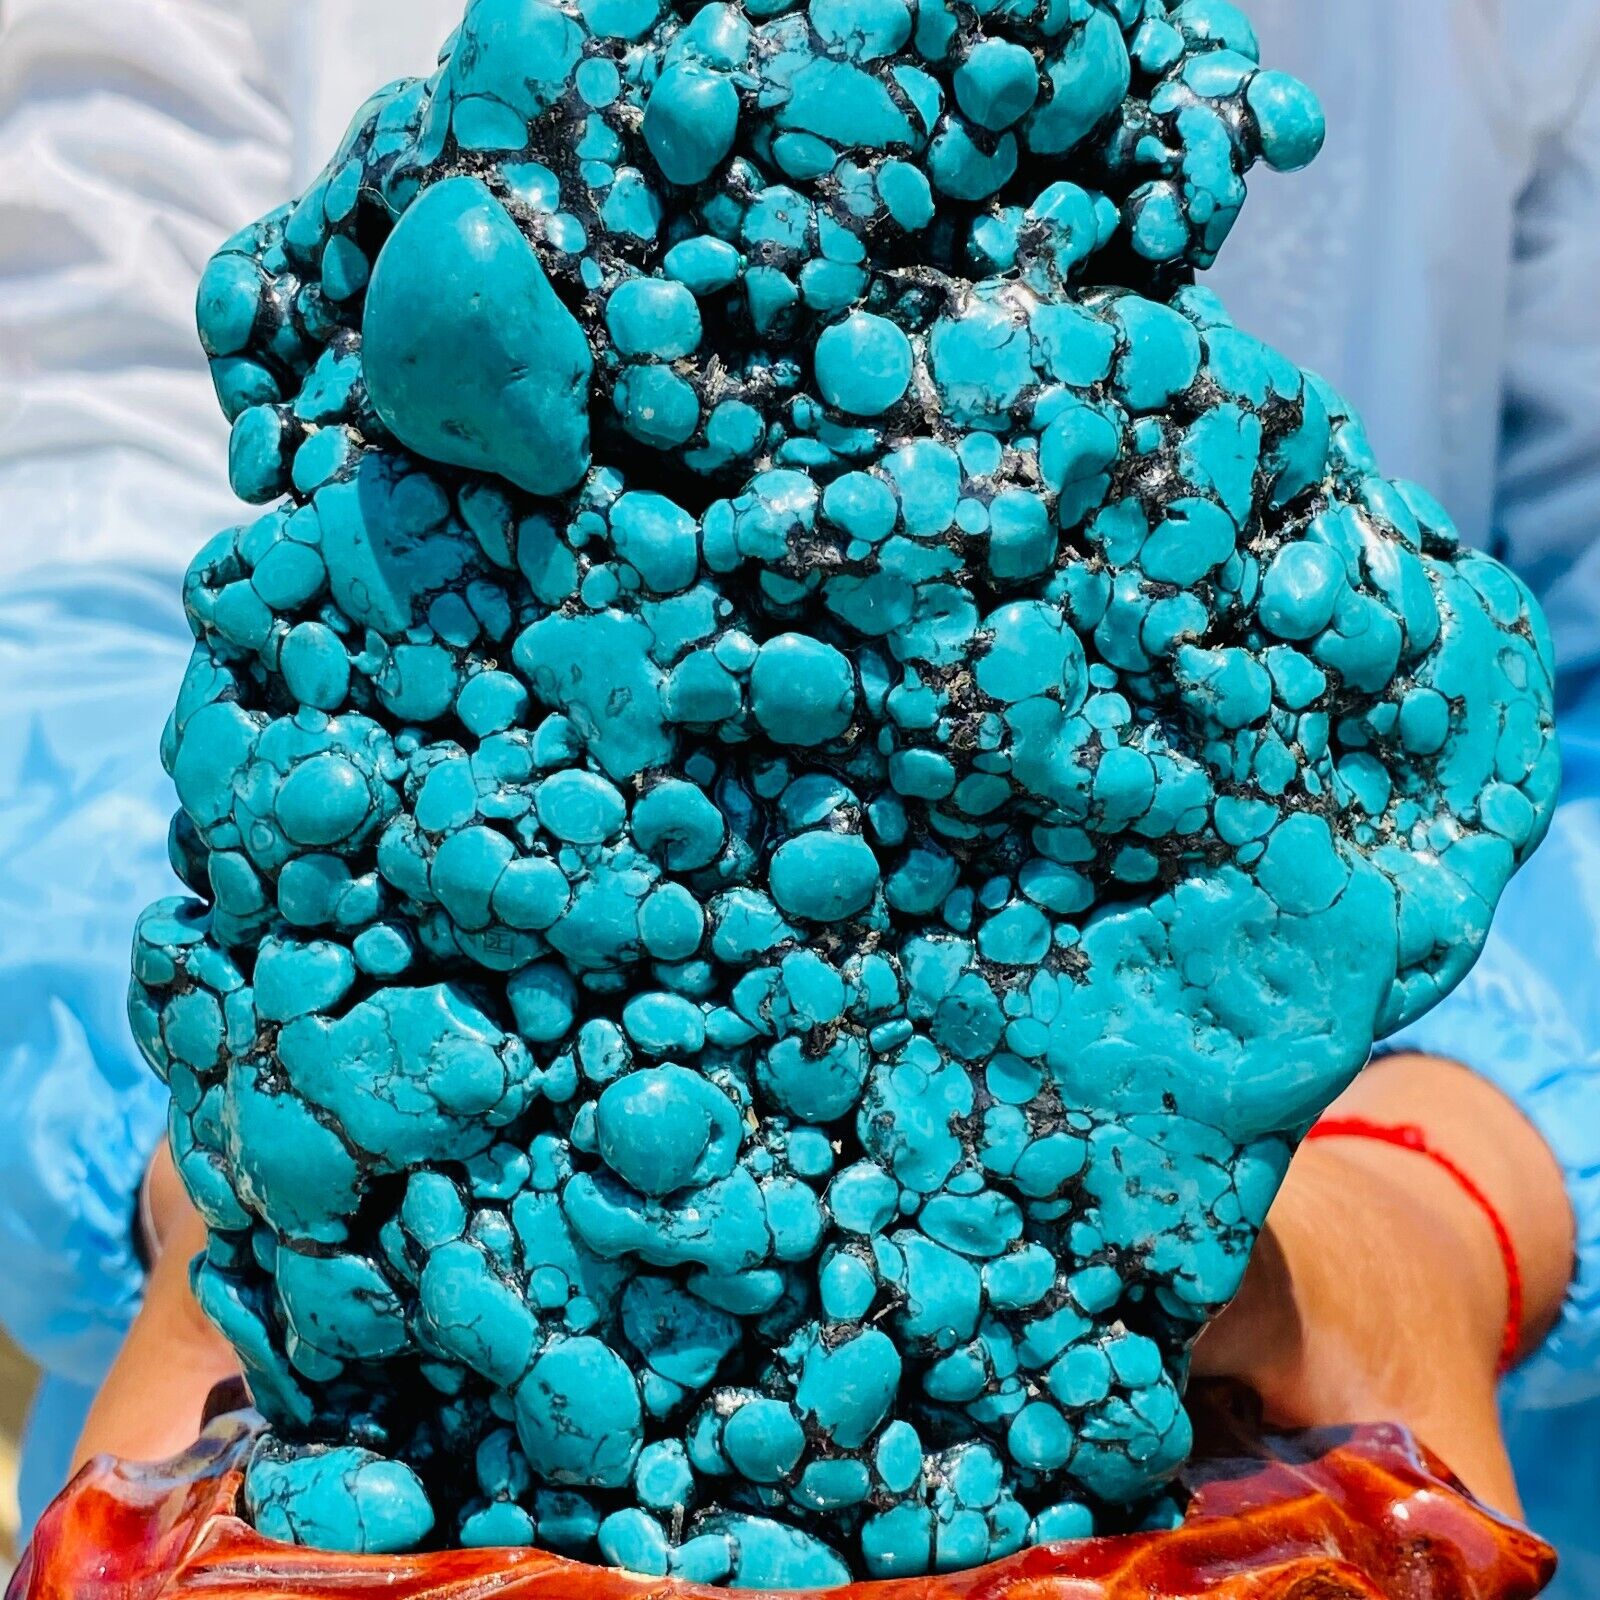 5.20lb Large Natural Green Turquoise Rough Gemstone Crystal Specimen+Stand